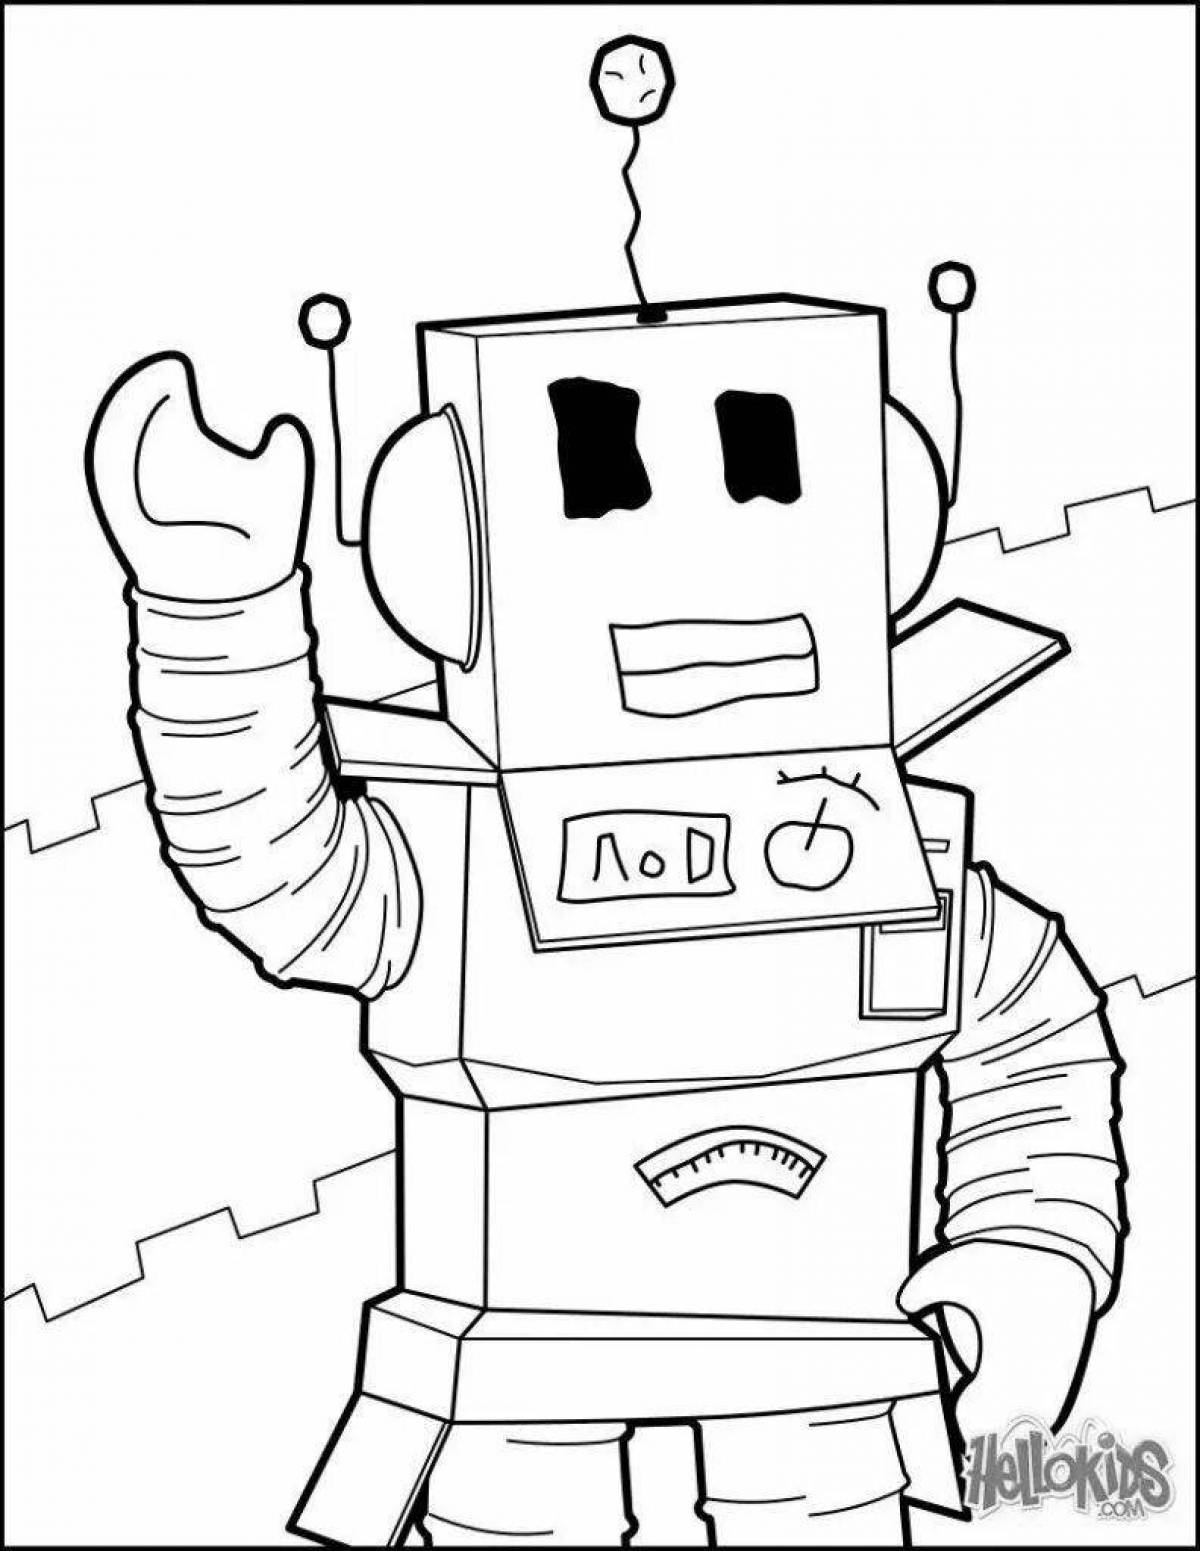 Robloxers fun coloring pages